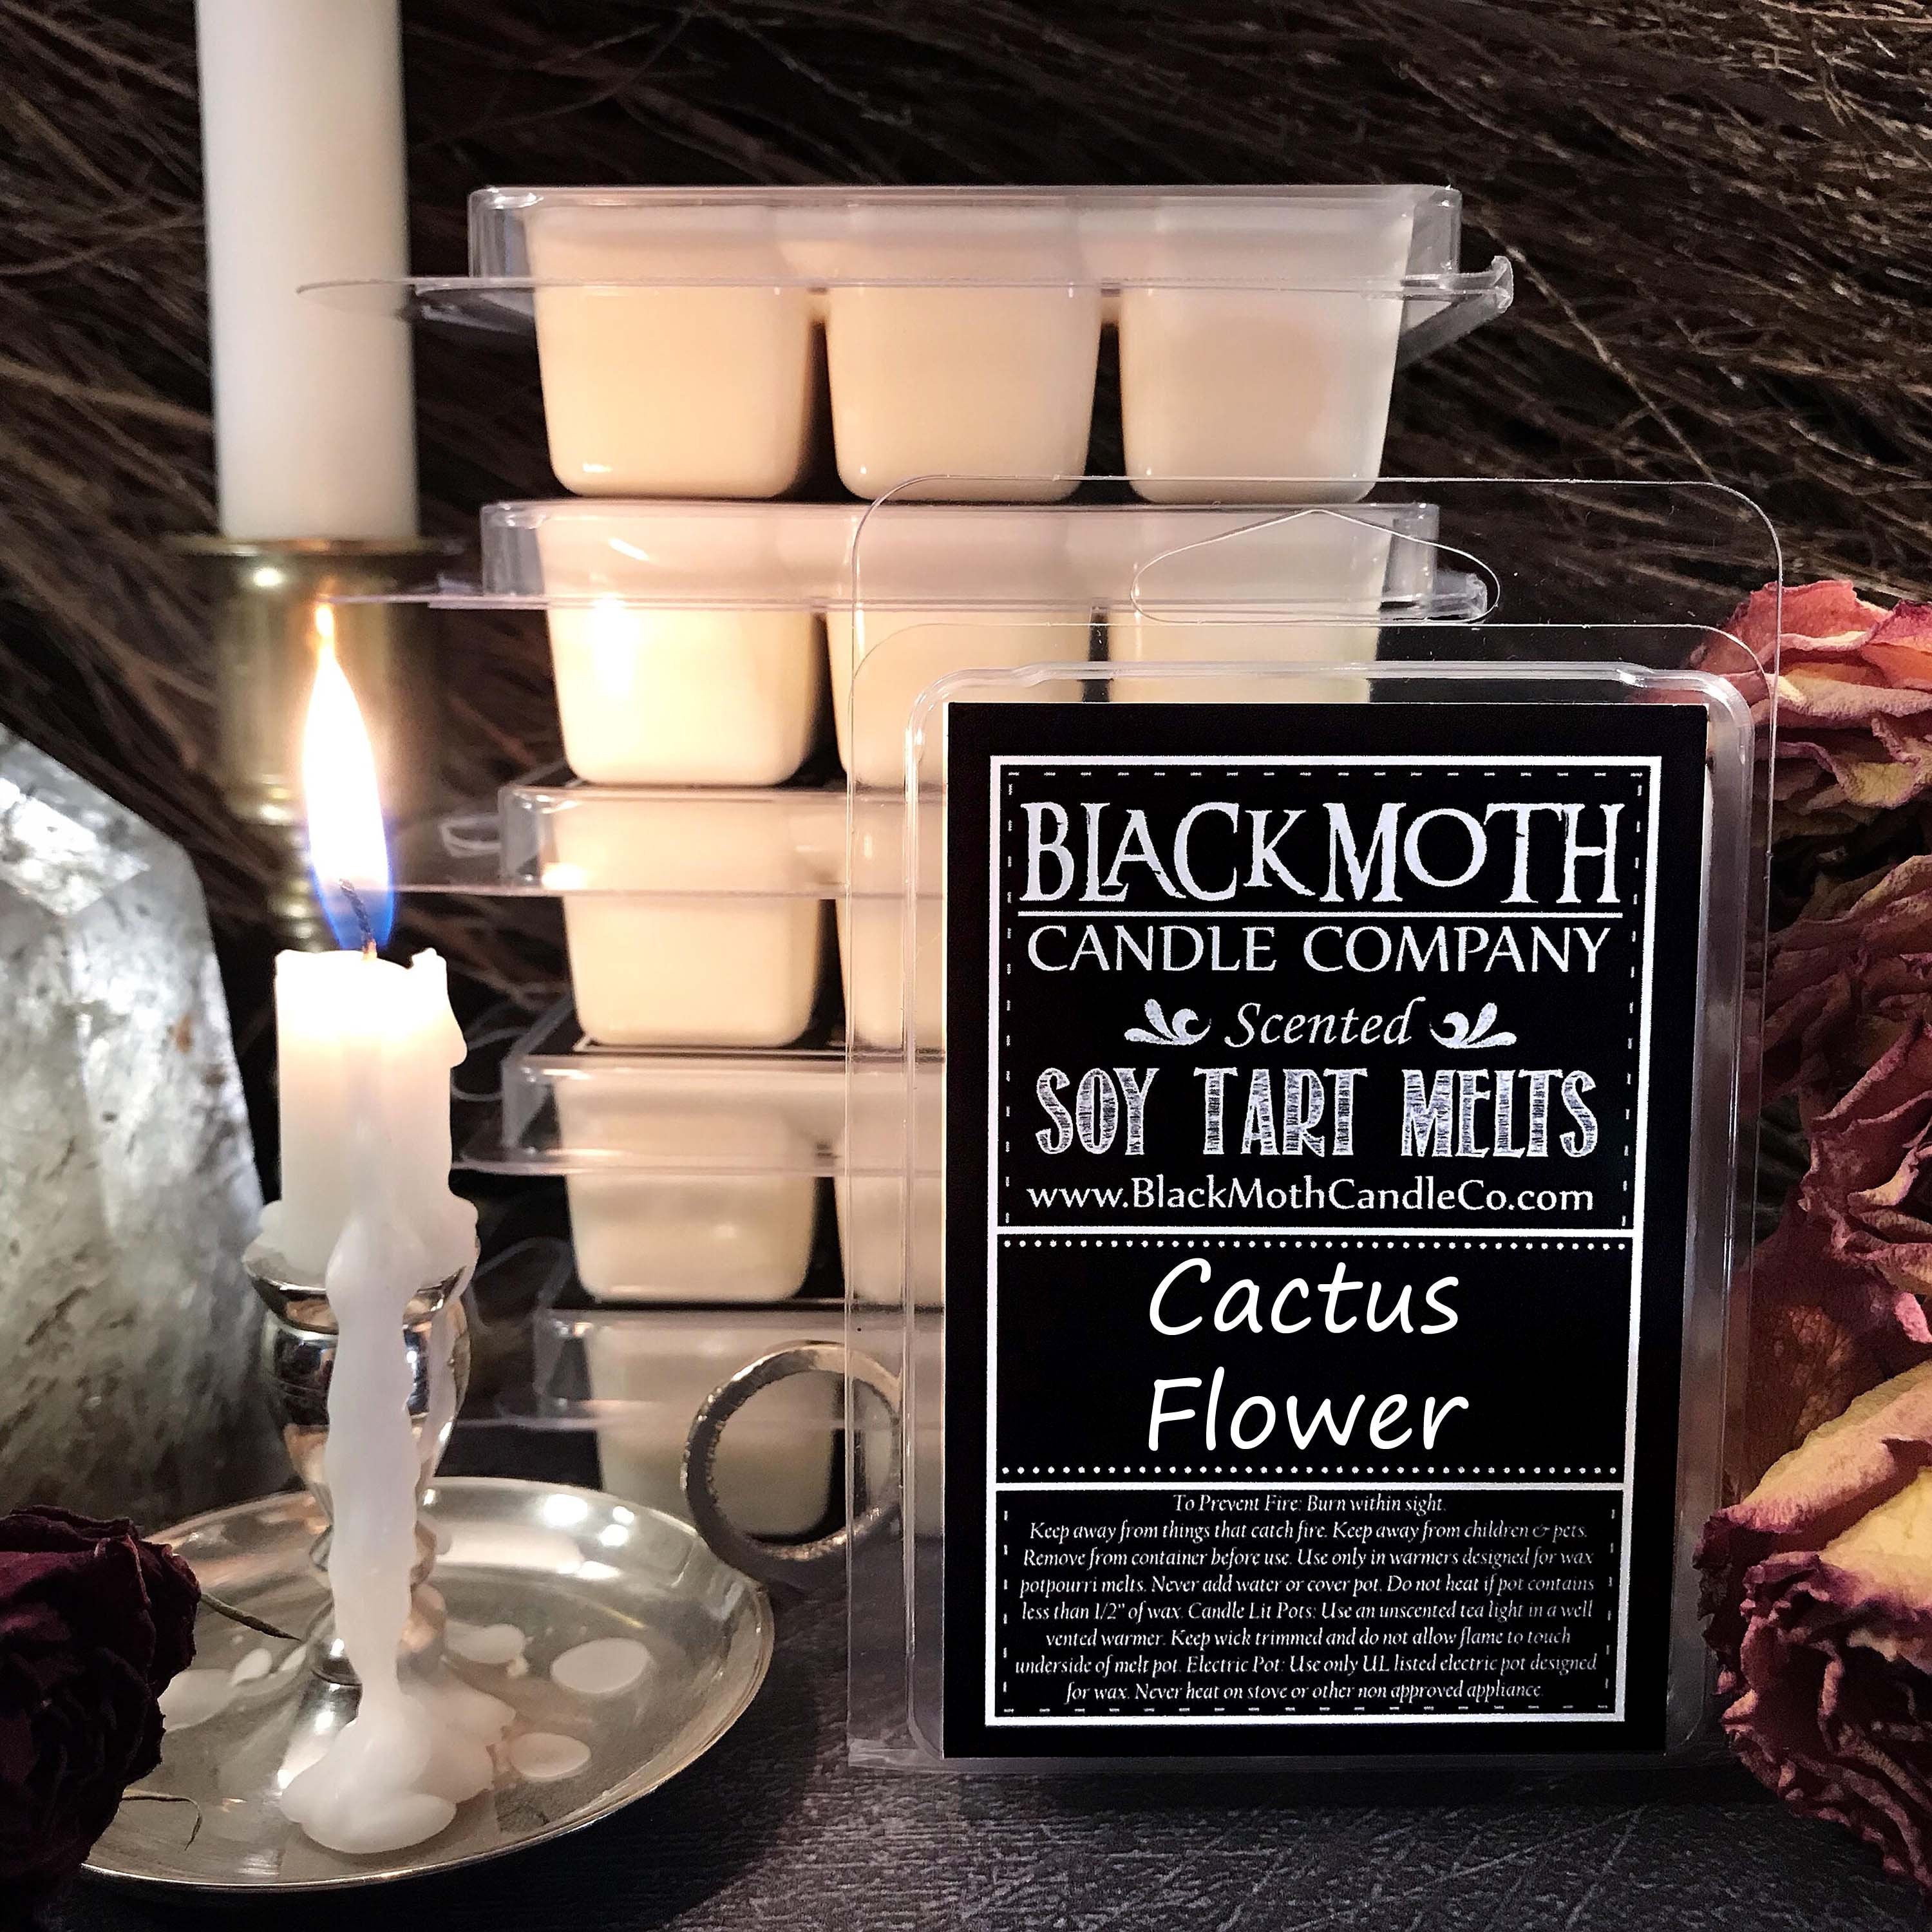 Cactus Flower Scented Soy Wax Melts